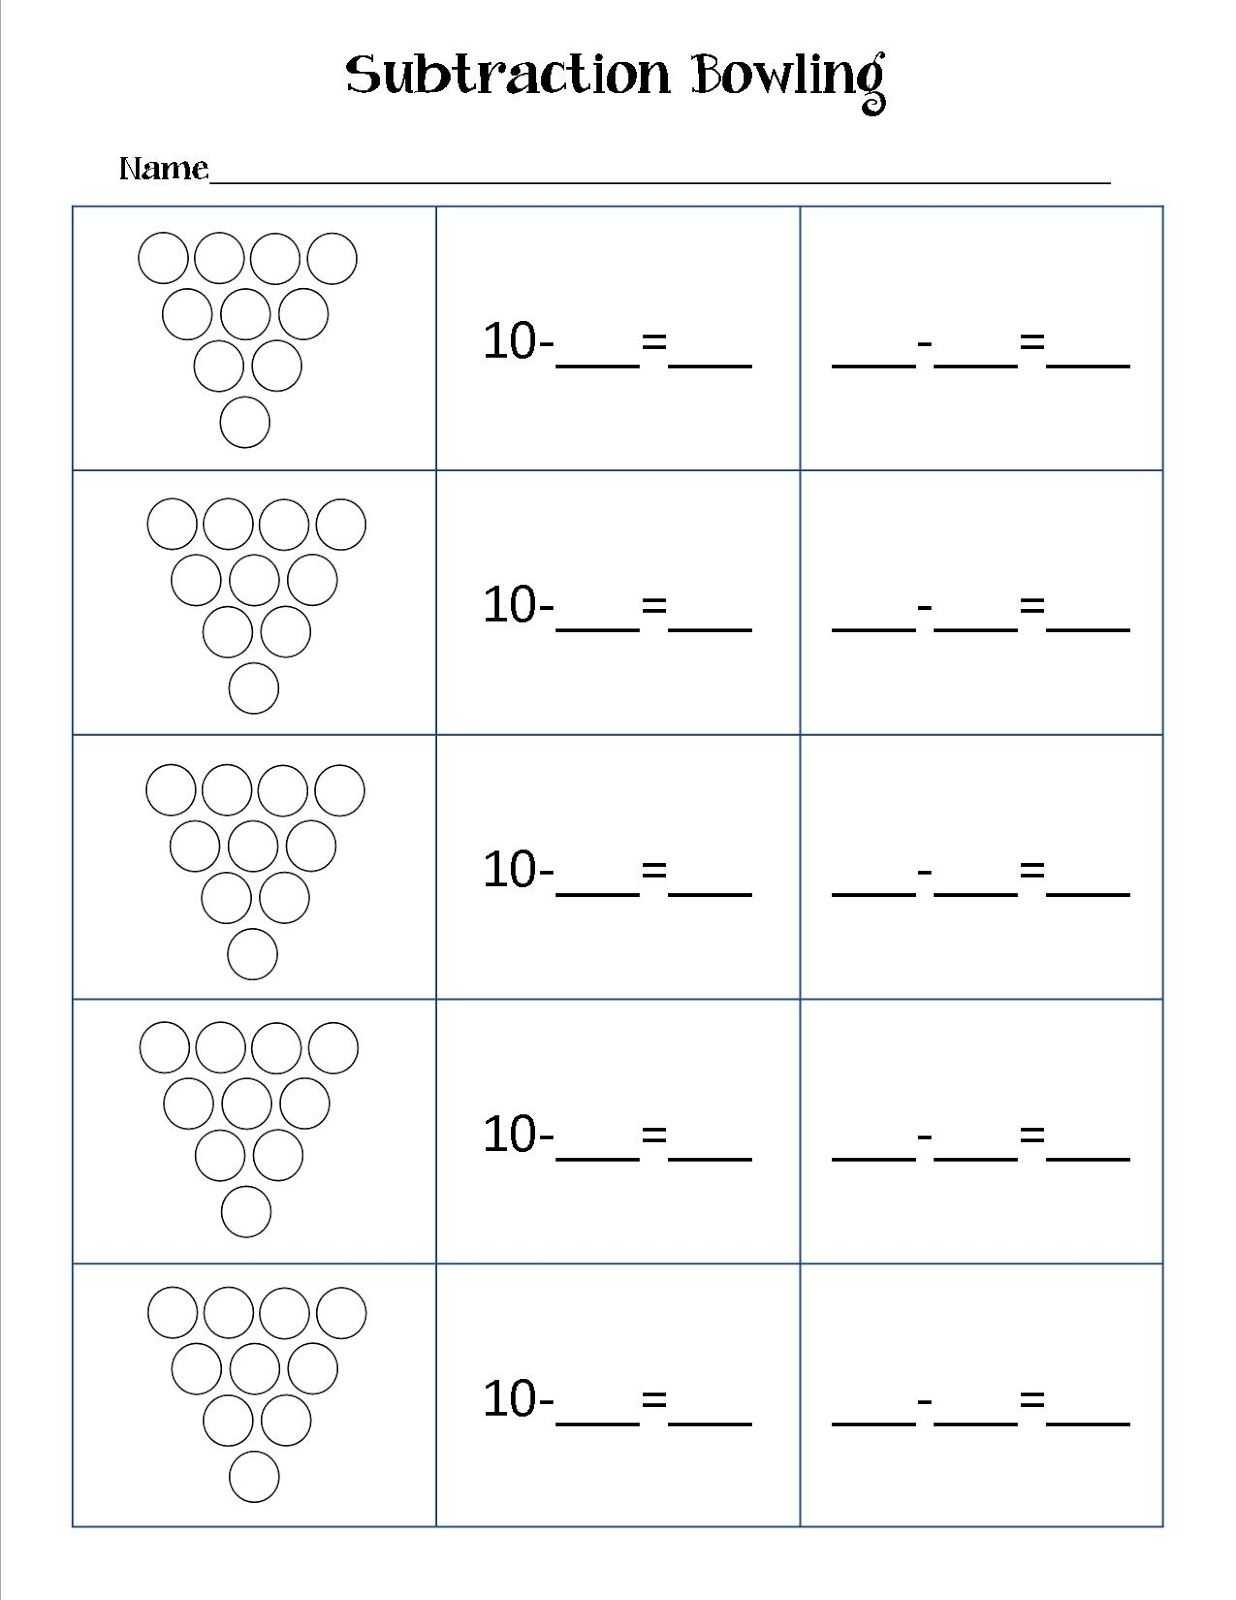 Arithmetic Sequence Worksheet Pdf or Free Recording Sheet to Use while Practicing Subtraction with